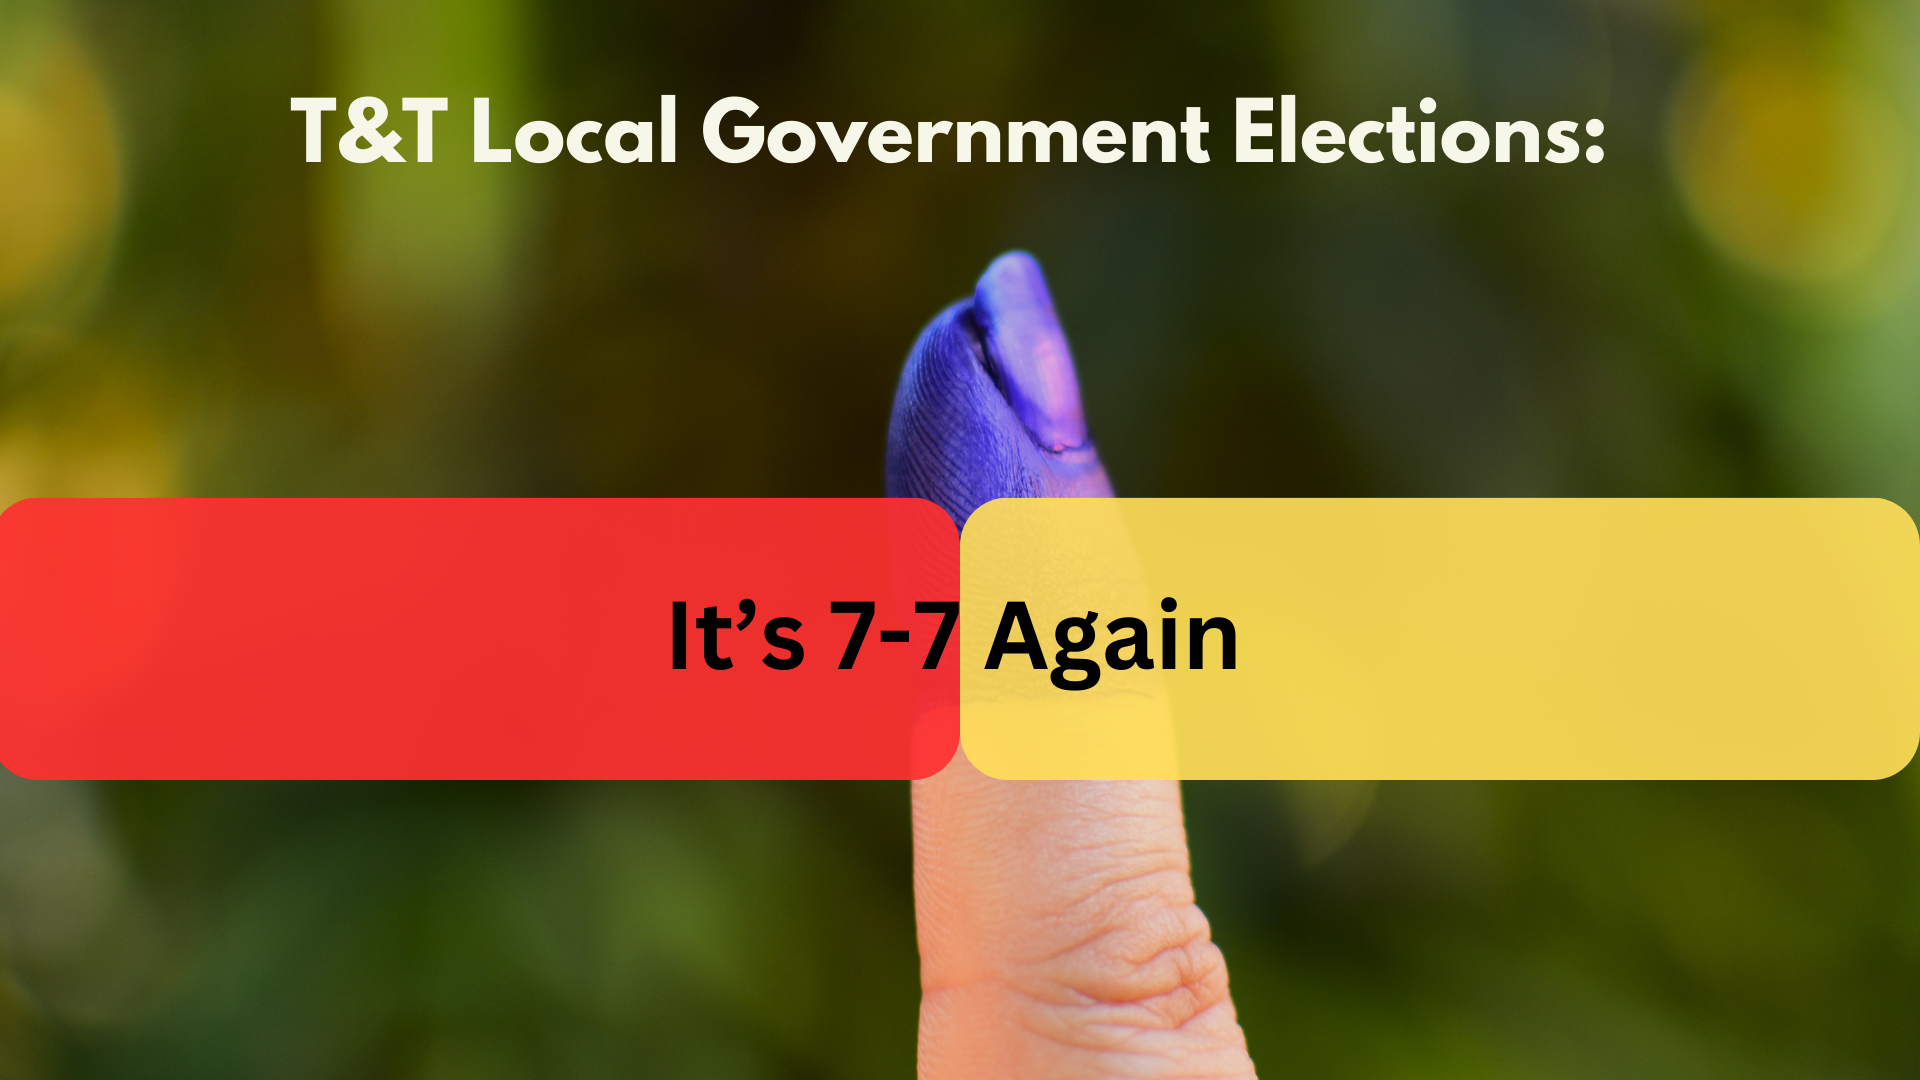 T&T Local Government Elections